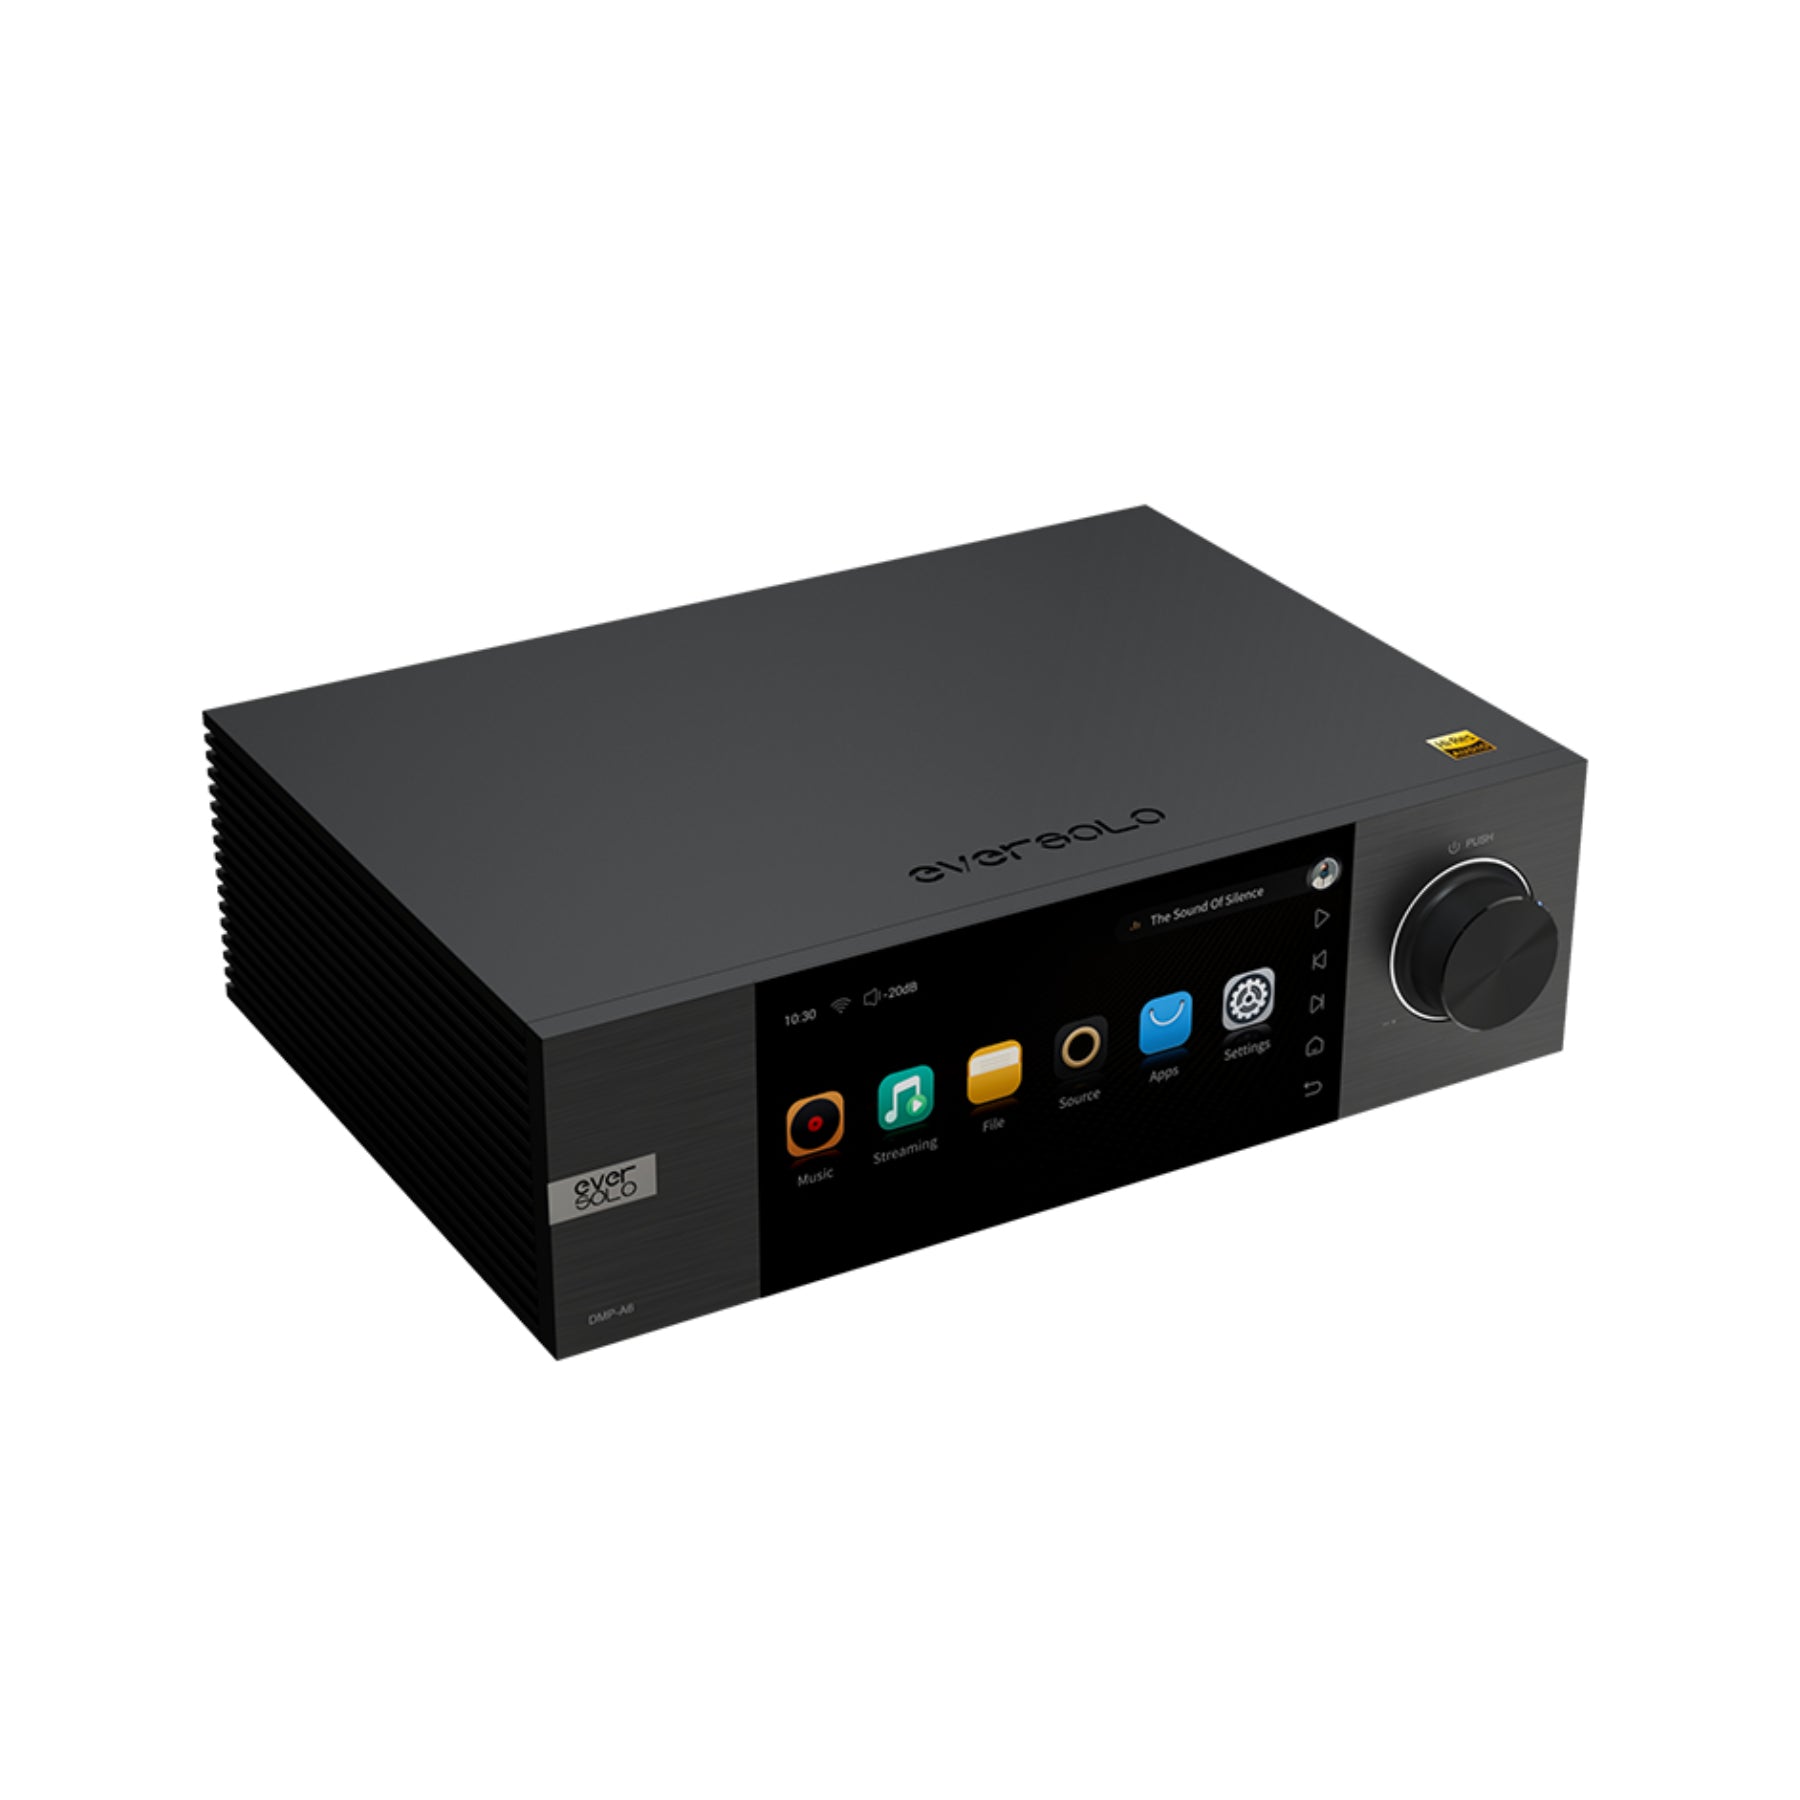 EverSolo DMP-A6 Streaming DAC Review 